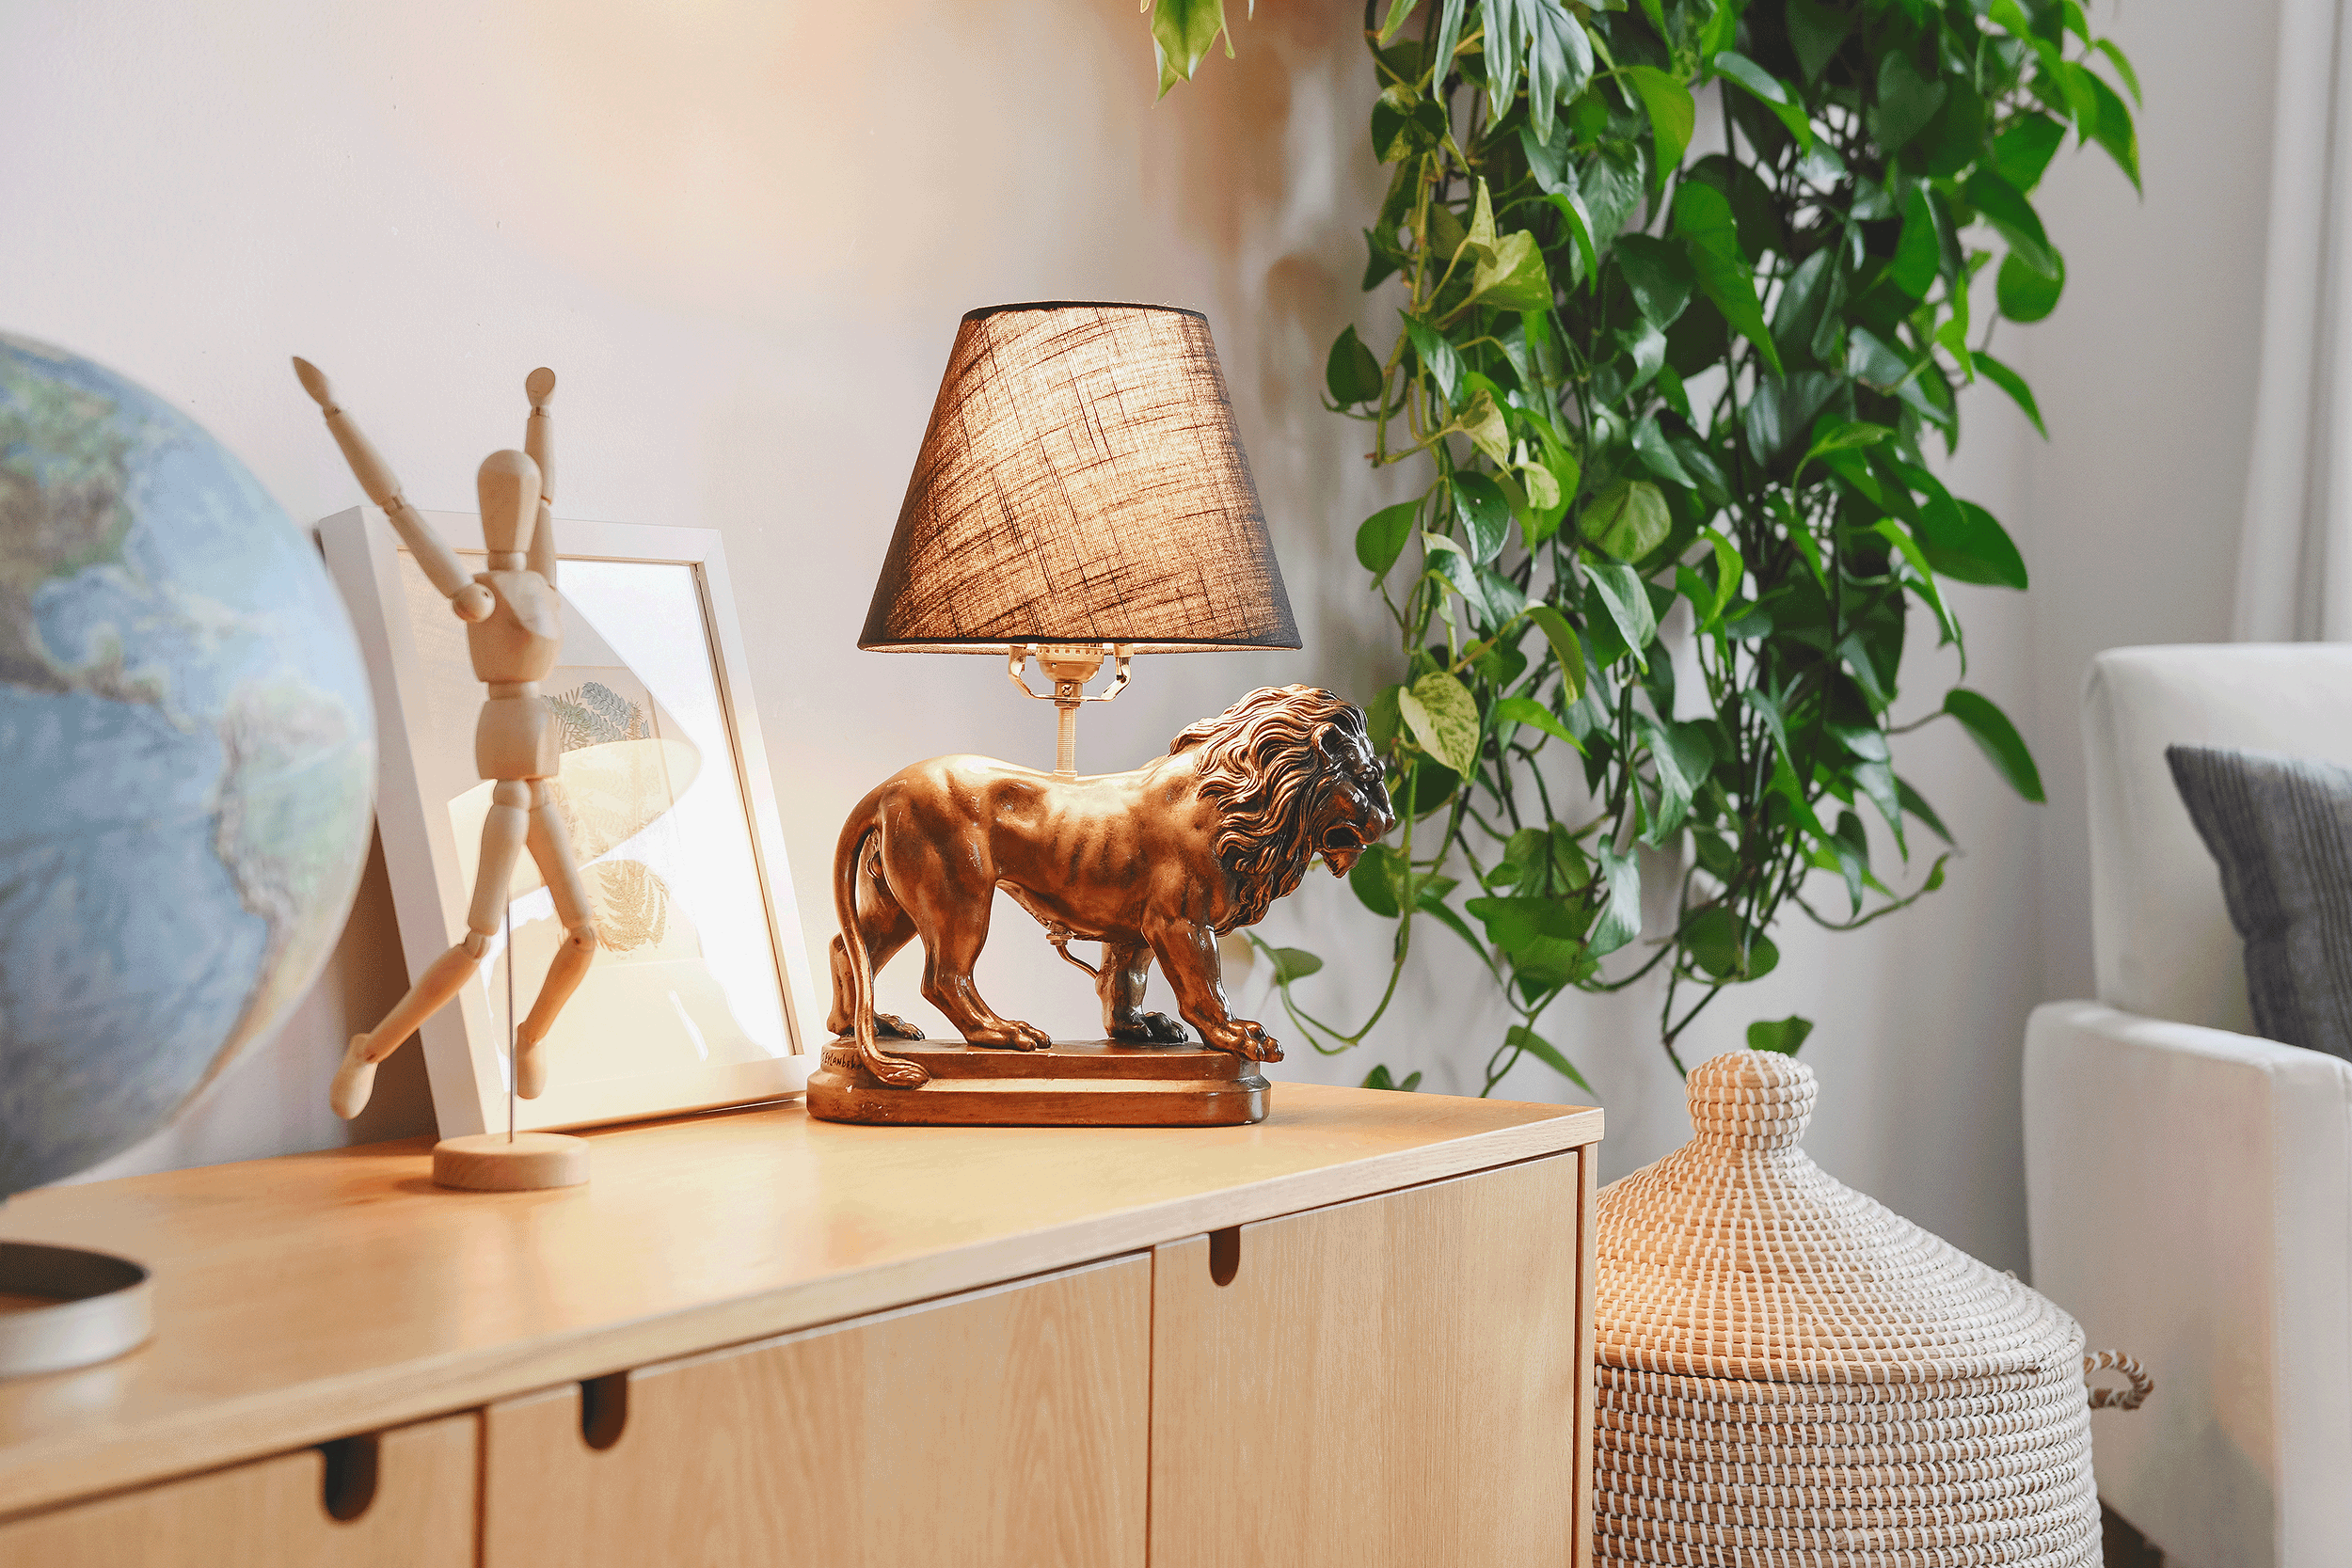 A GIF shows our DIY lion lamp lighting up the credenza in our playroom surrounded by plants and greenery // via Yellow Brick Home